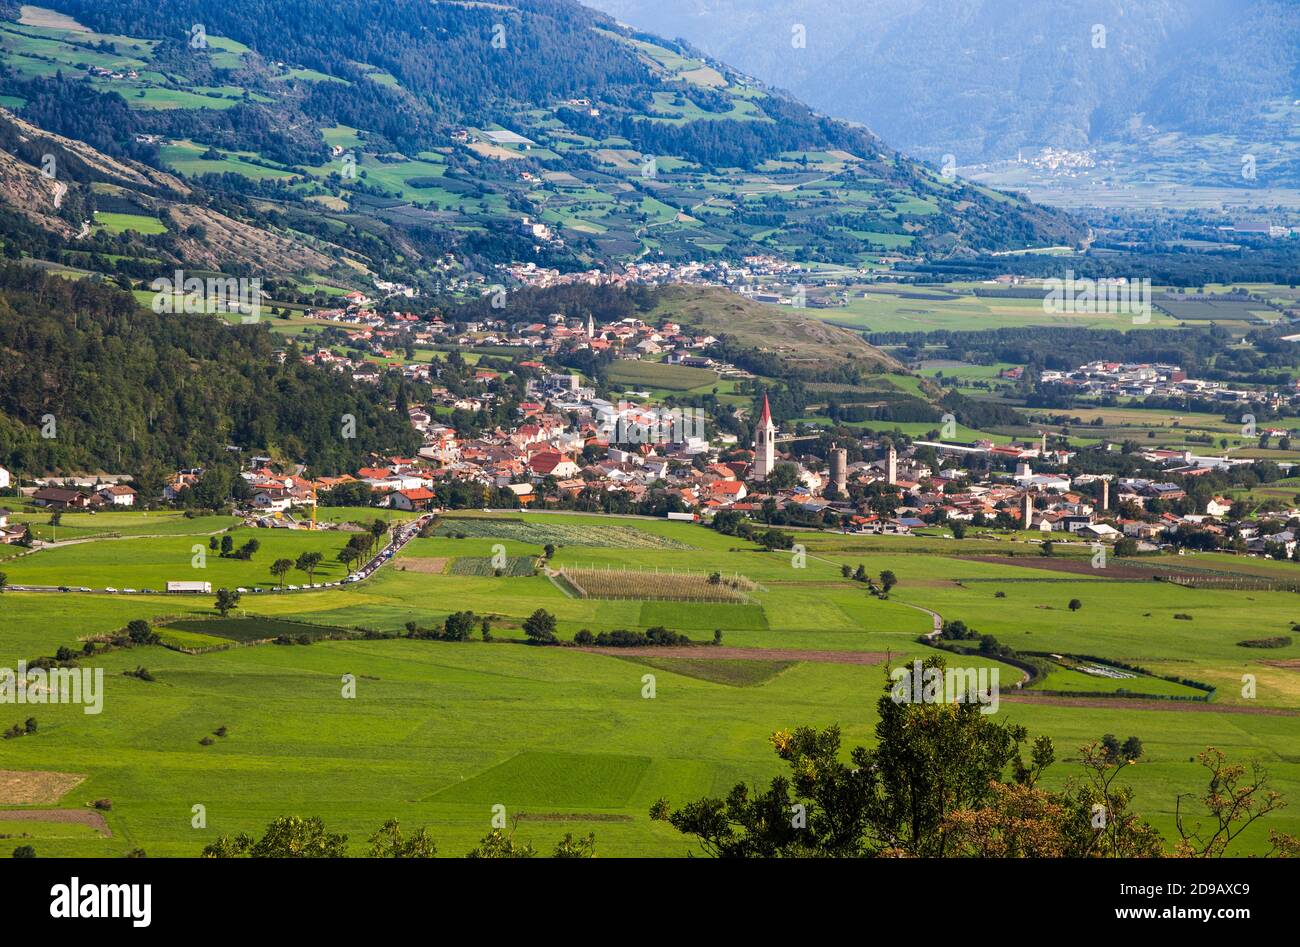 MALLES, ITALY, SEPTEMBER 11, 2020 - Aerial view of the alpine town of Malles, Val Venosta, South Tyrol, Italy Stock Photo